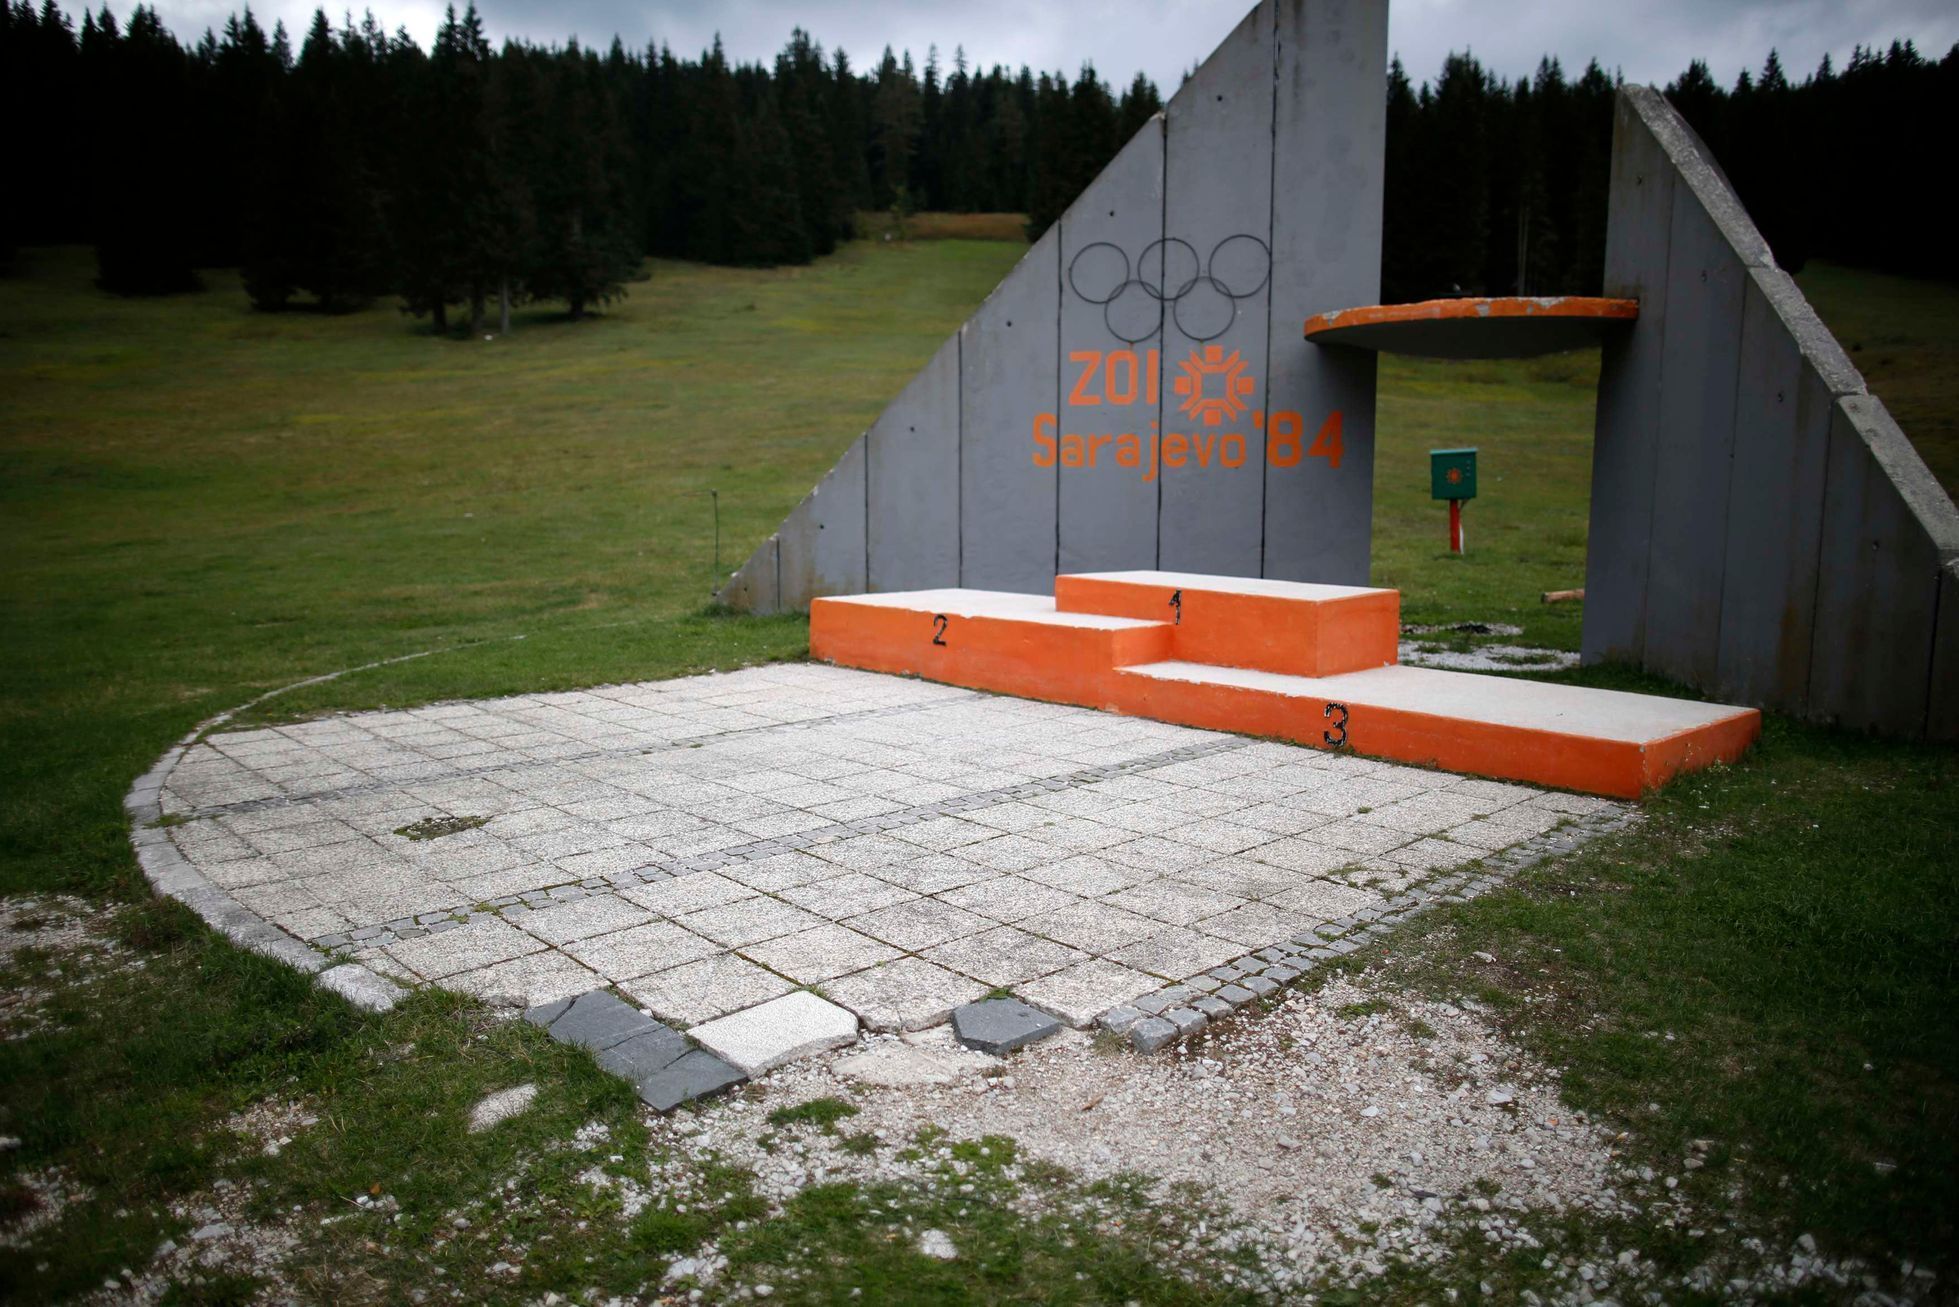 A view of the derelict medals podium at the disused ski jump from the Sarajevo 1984 Winter Olympics on Mount Igman, near Saravejo